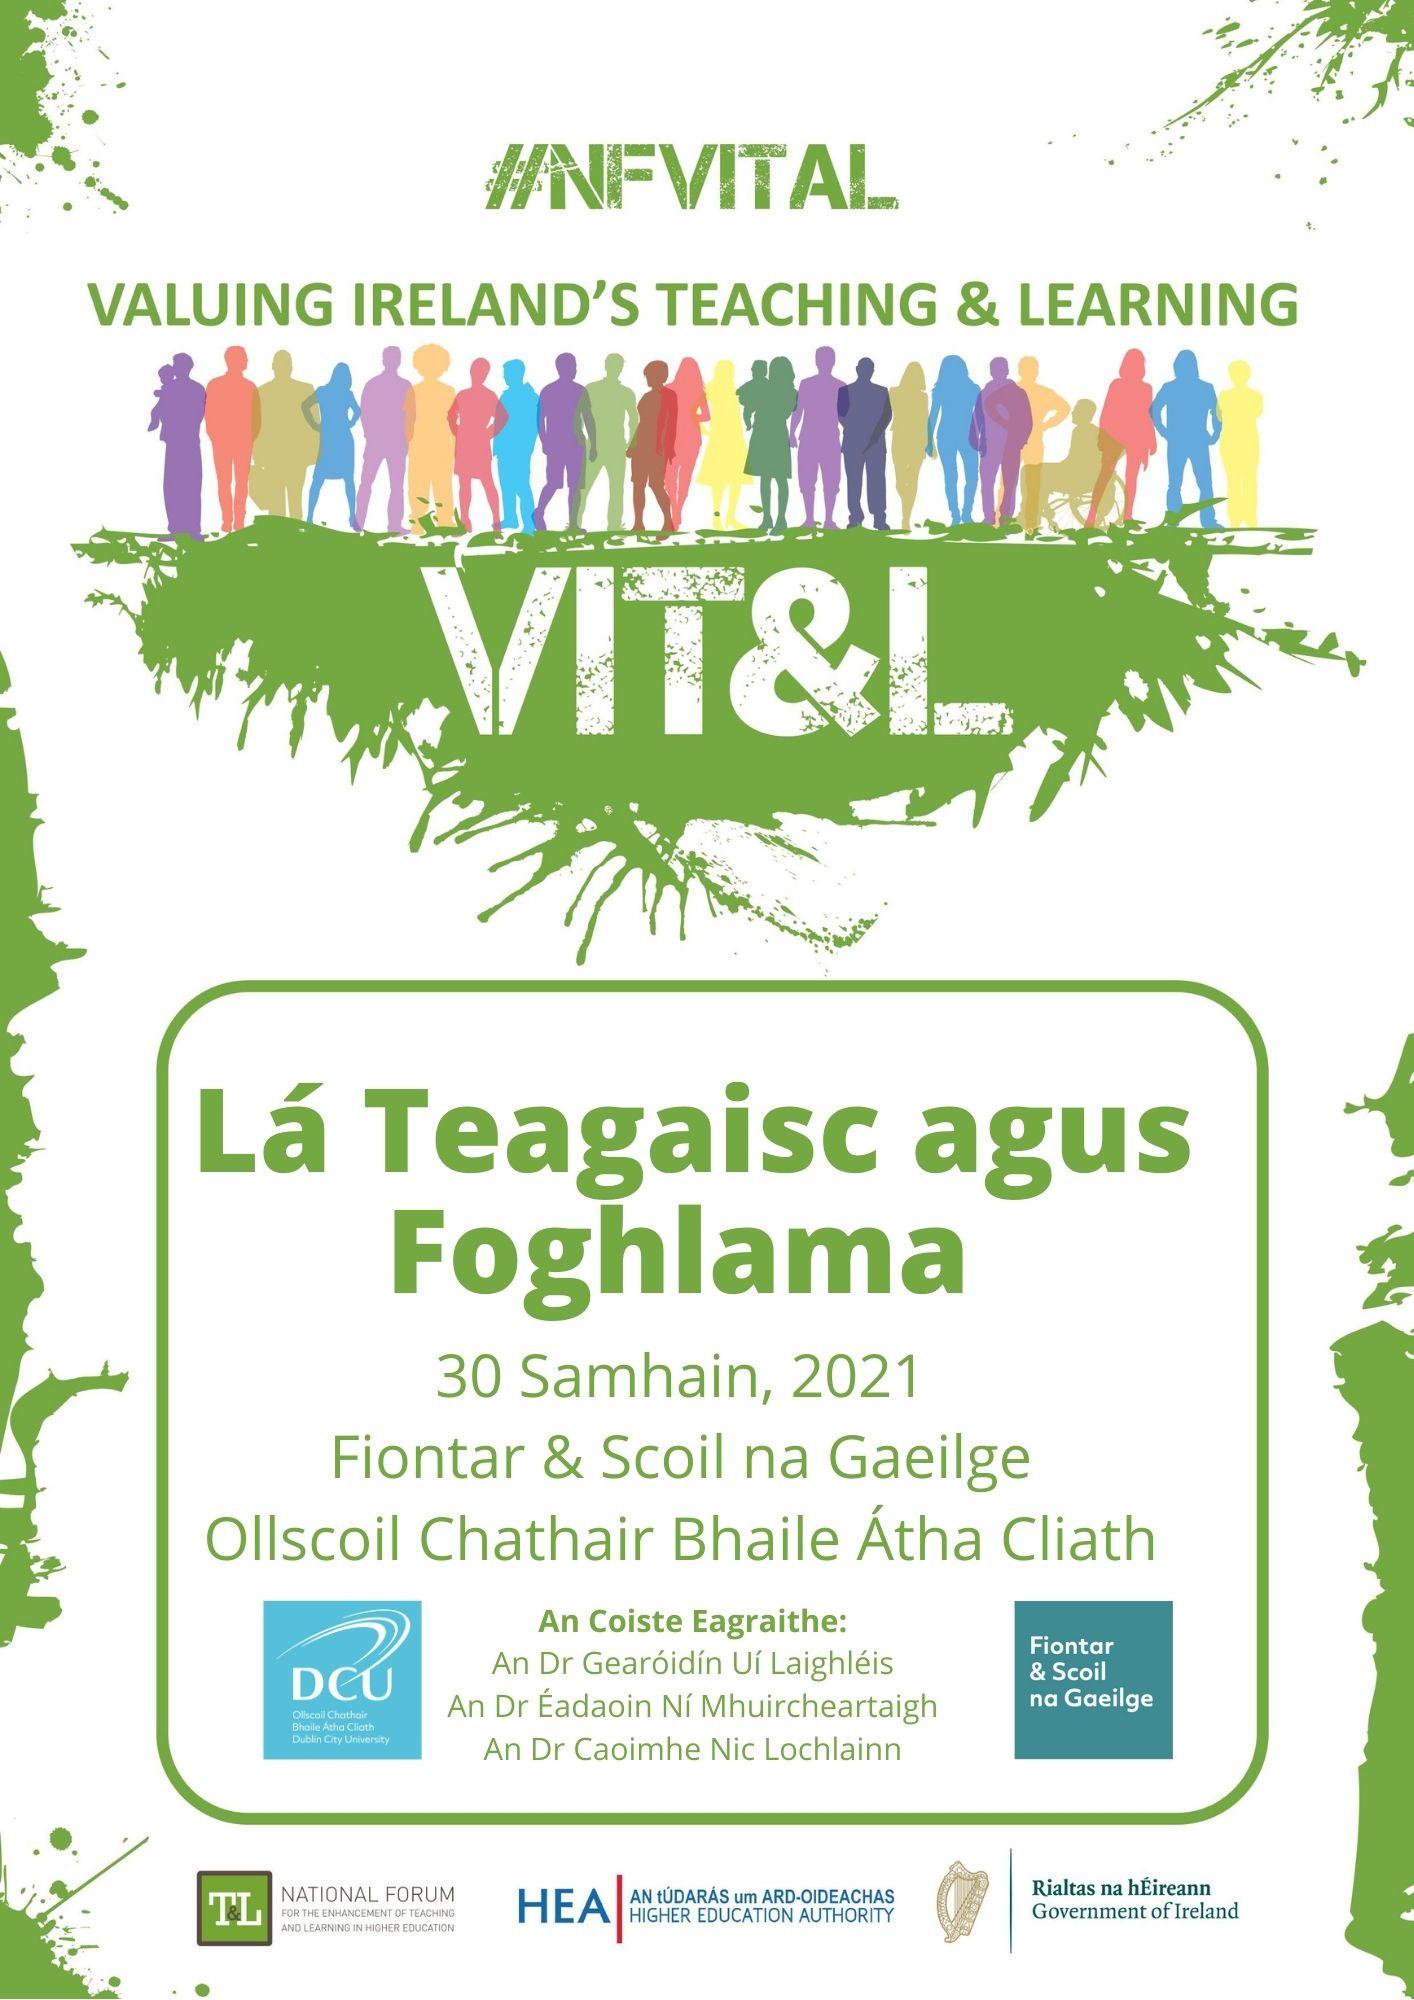 Image for Teaching & Learning Day for Fiontar & Scoil na Gaeilge